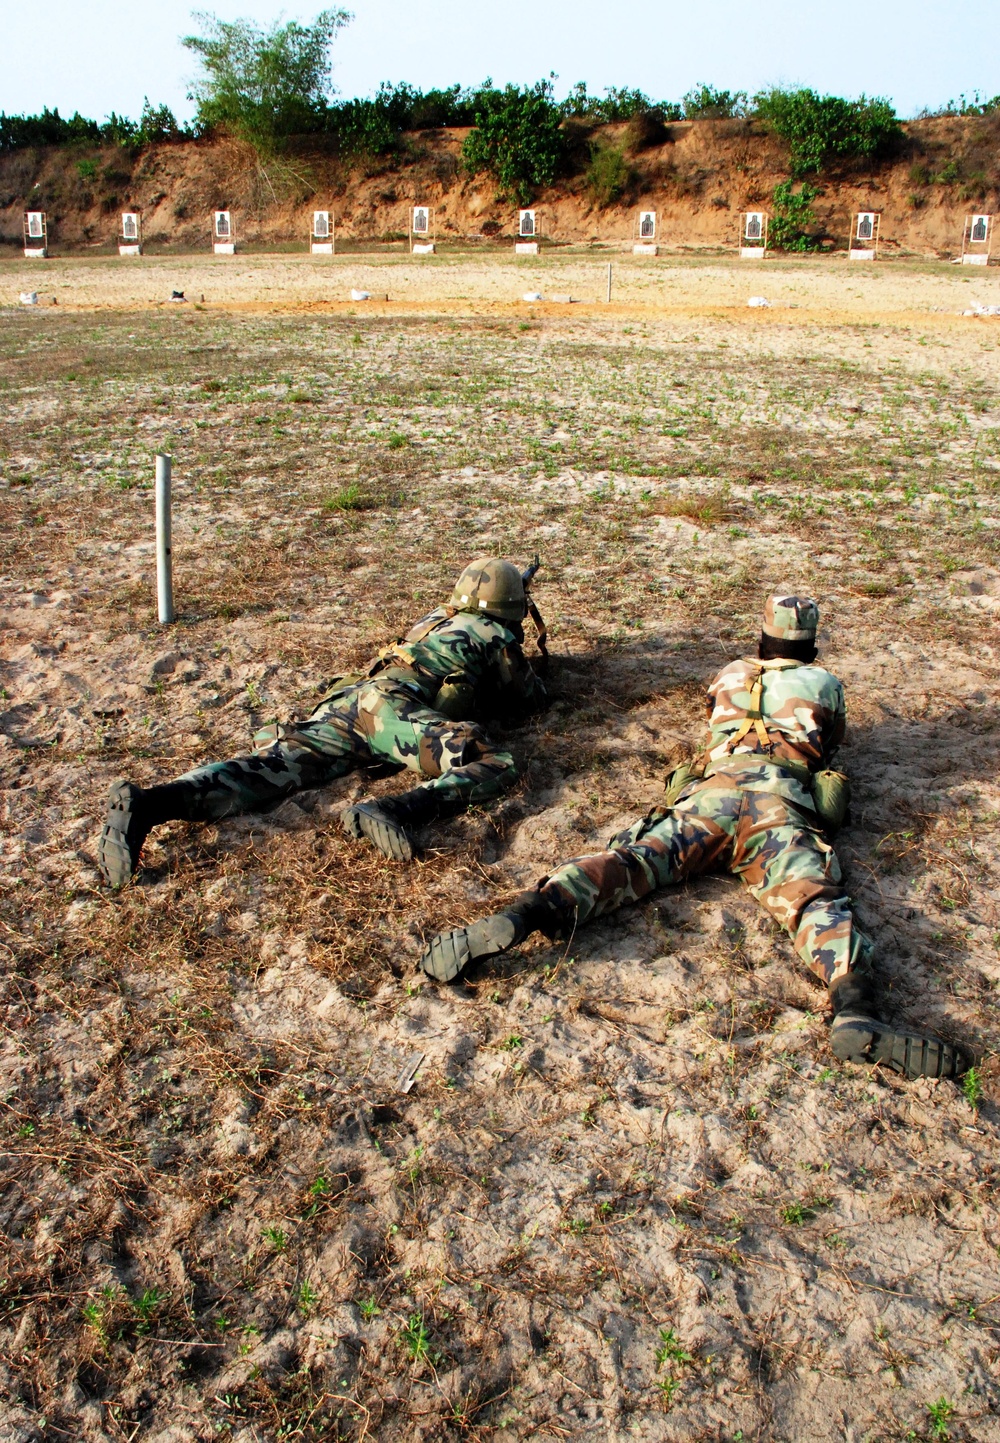 Armed Forces of Liberia’s soldiers are autonomous on rifle range